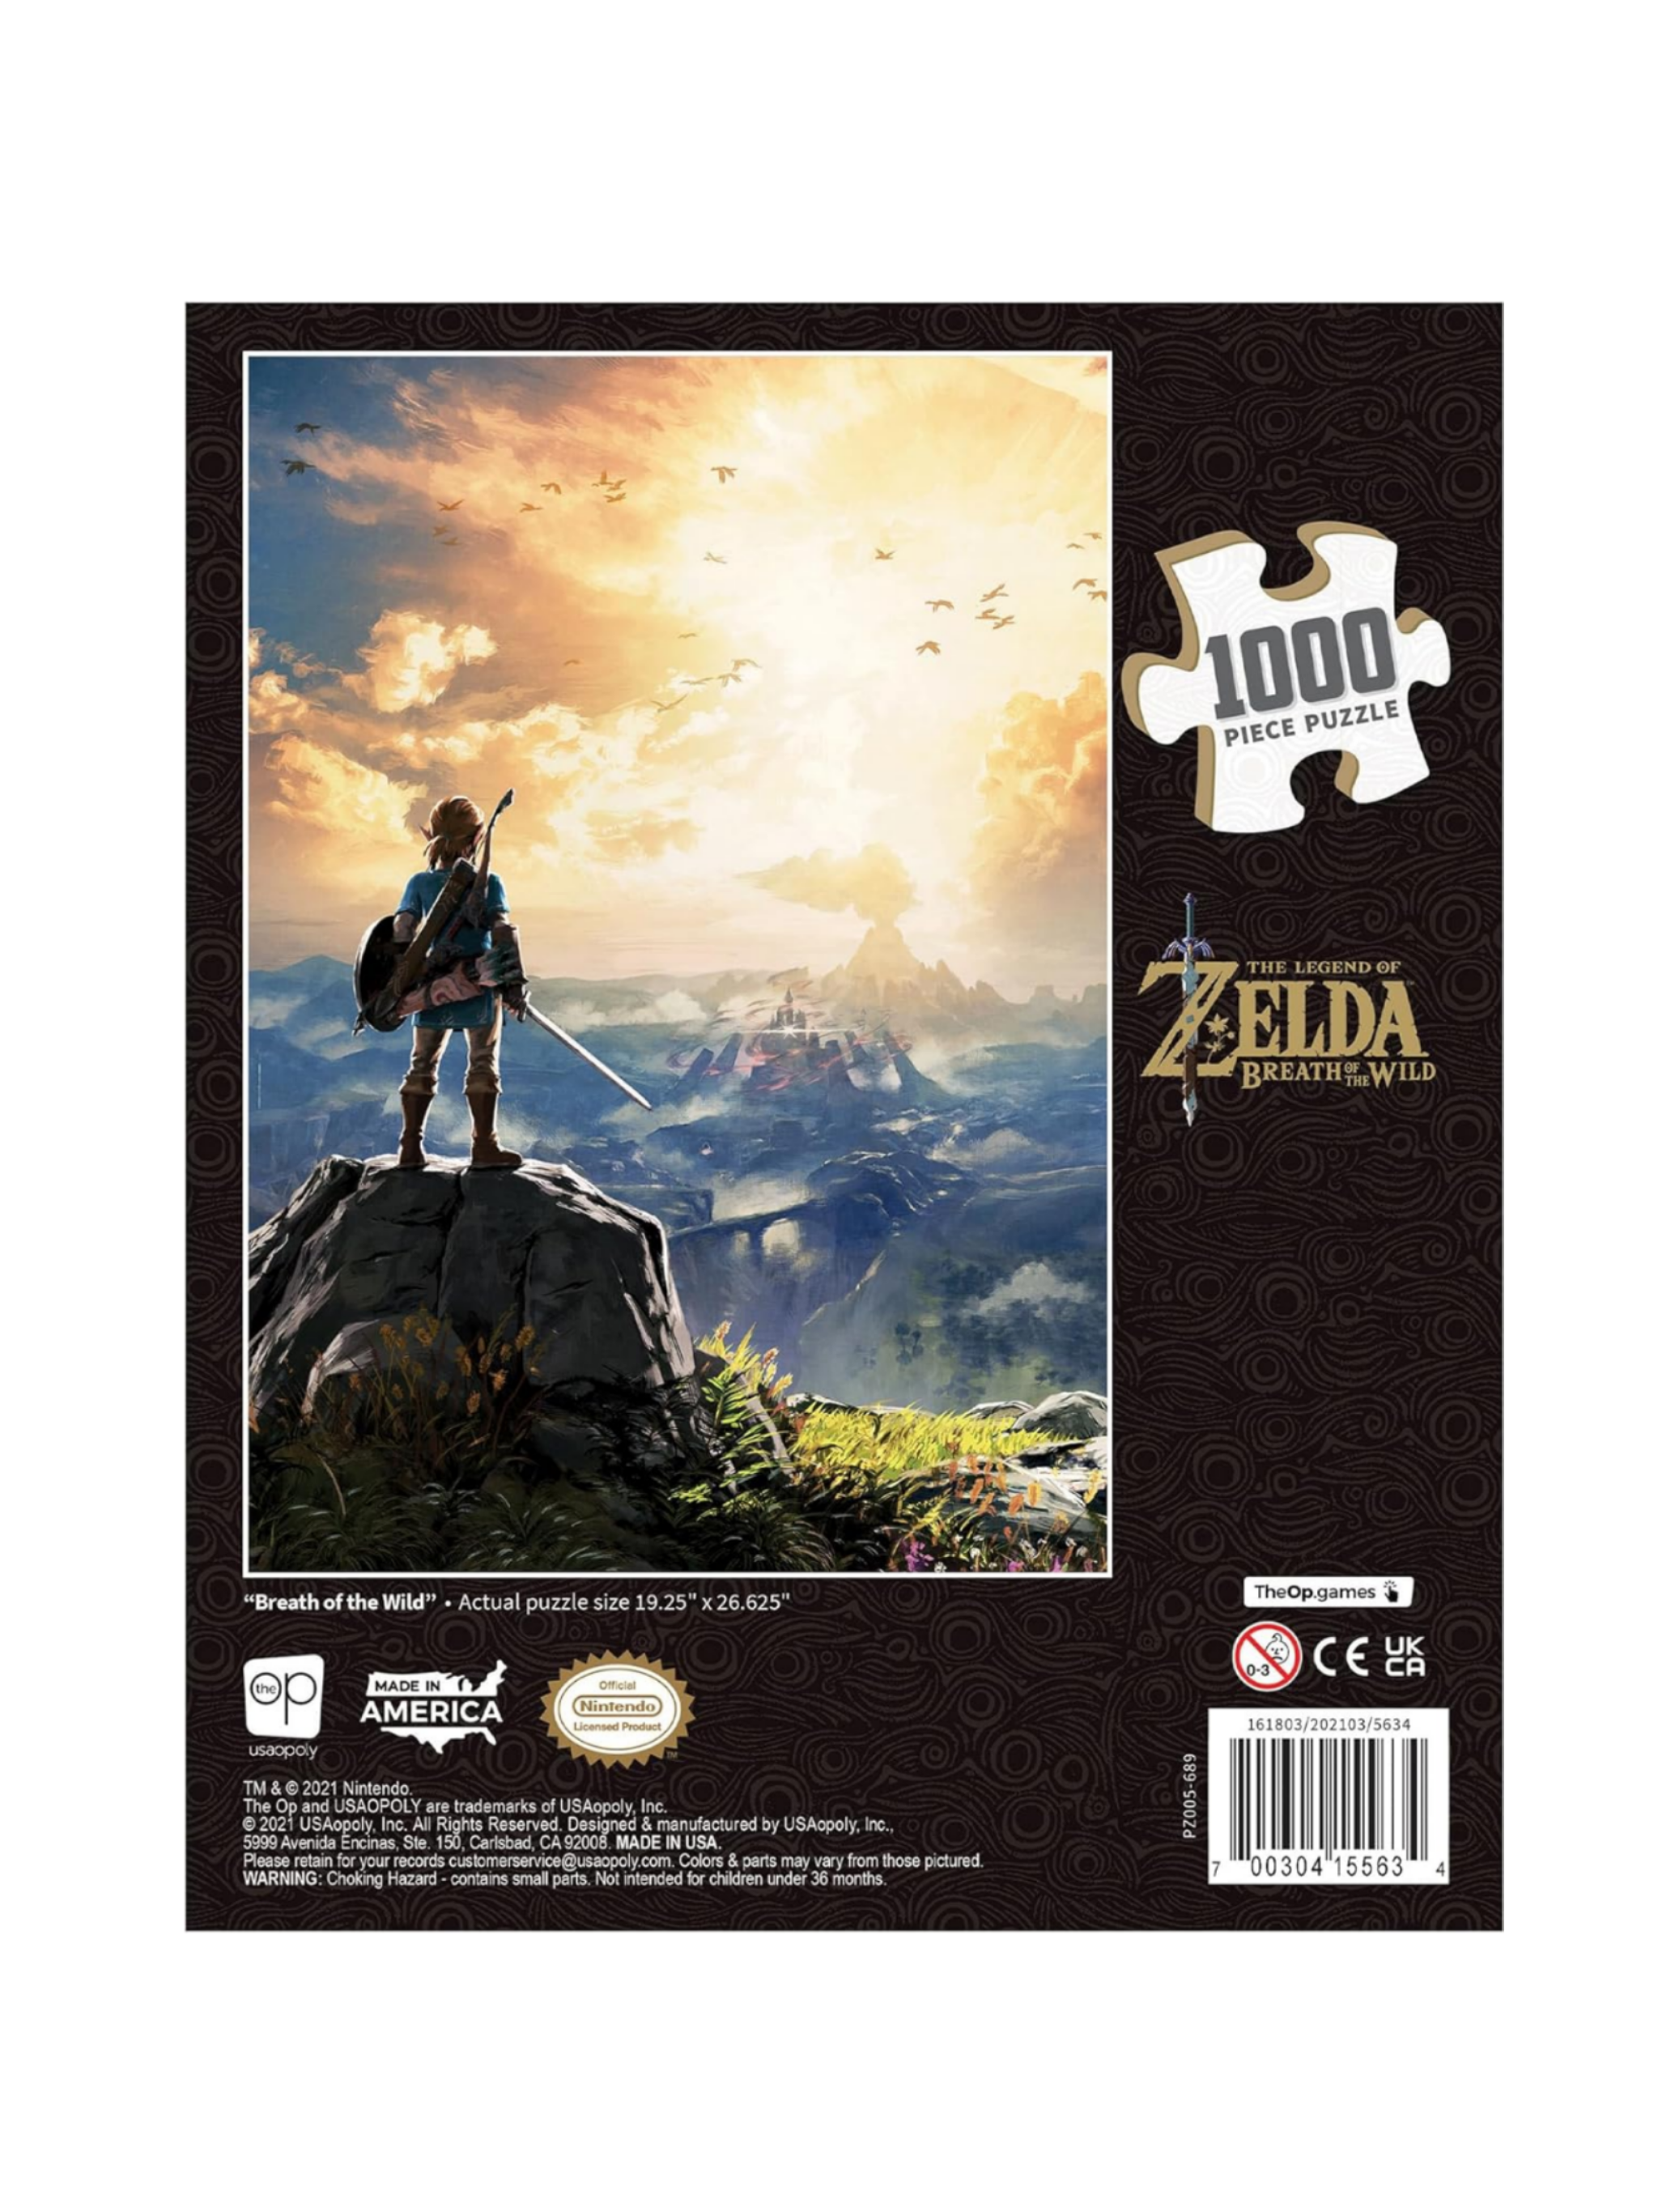 The Legend of Zelda Breath of the Wild Puzzle 1000 Teile